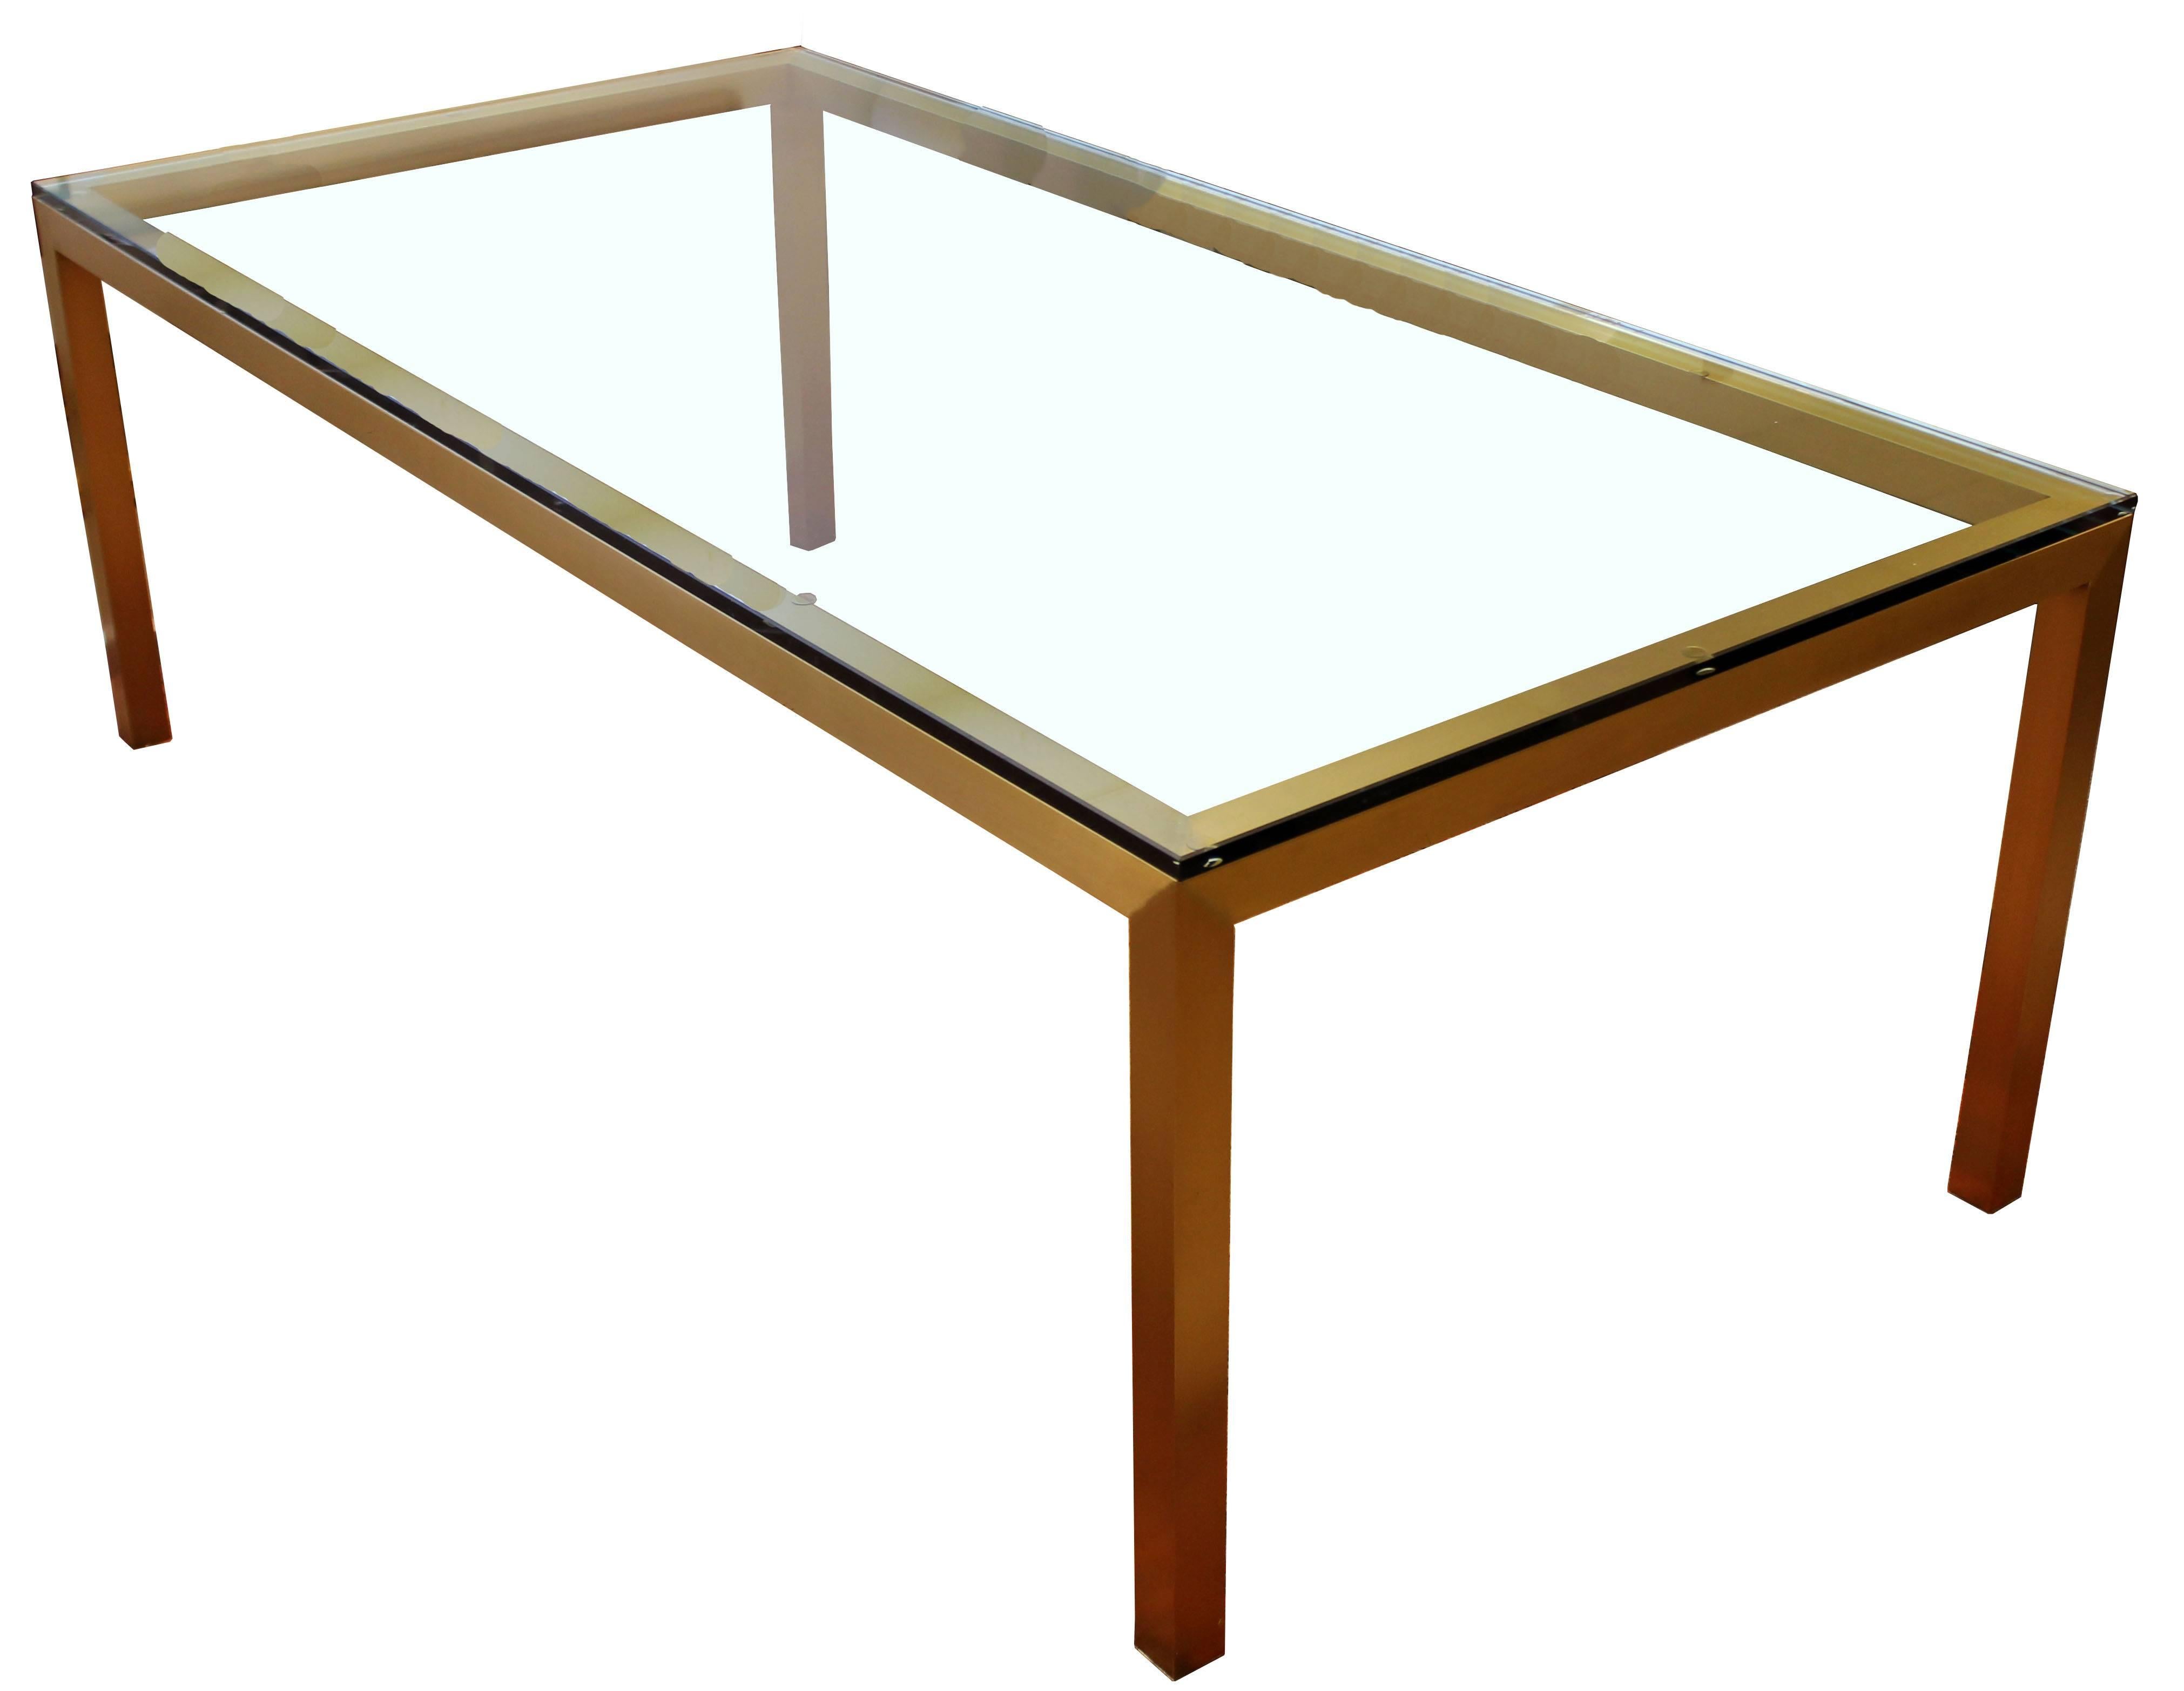 For your consideration long, luxe, bronze and glass, dining table by Brueton . In excellent condition. The dimensions are 84